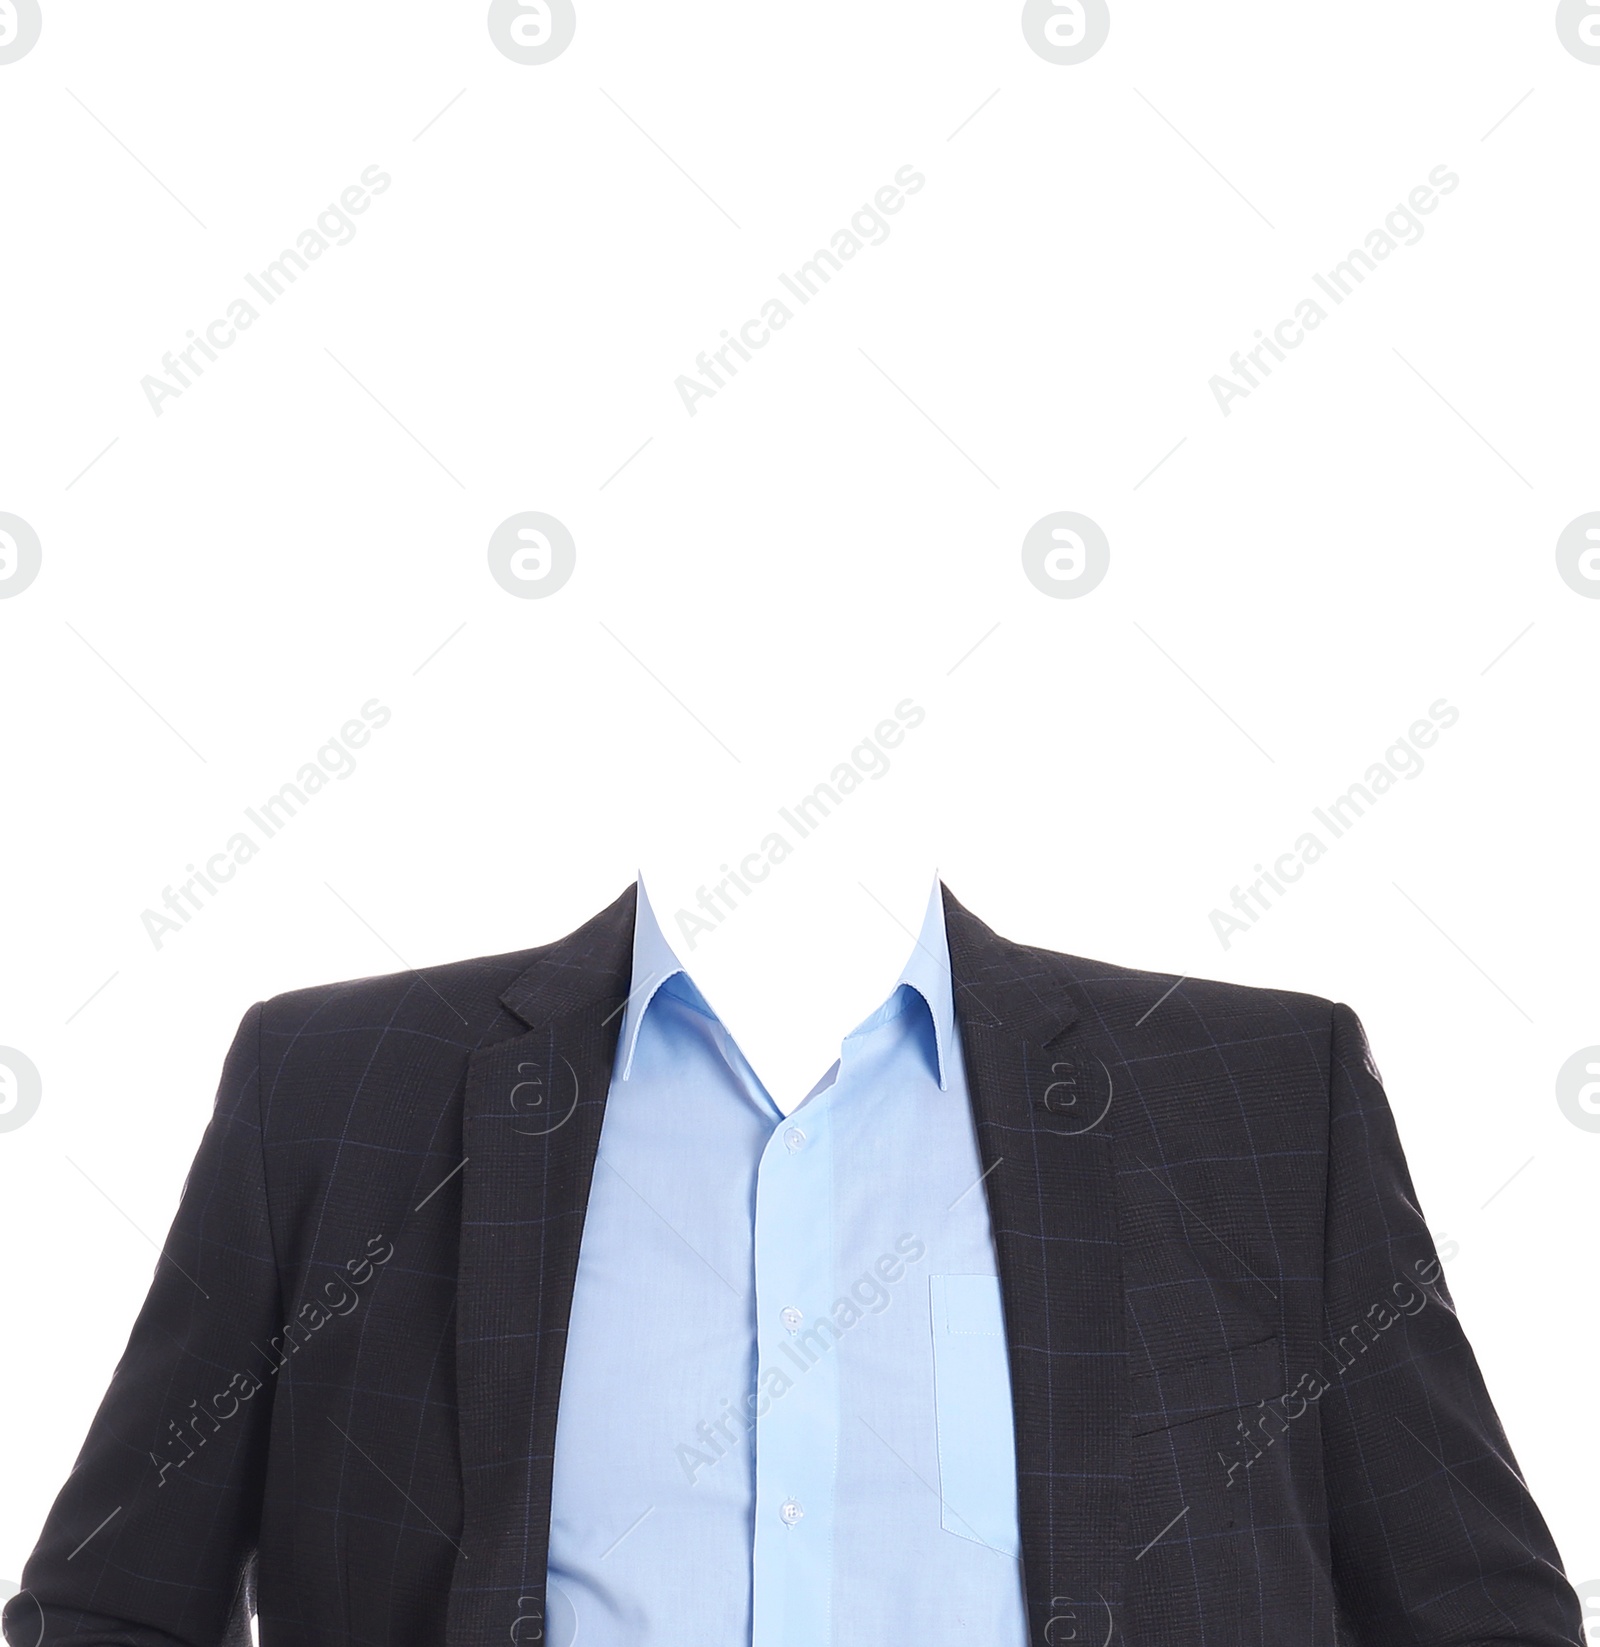 Image of Formal wear replacement template for passport photo or other documents. Jacket and shirt isolated on white